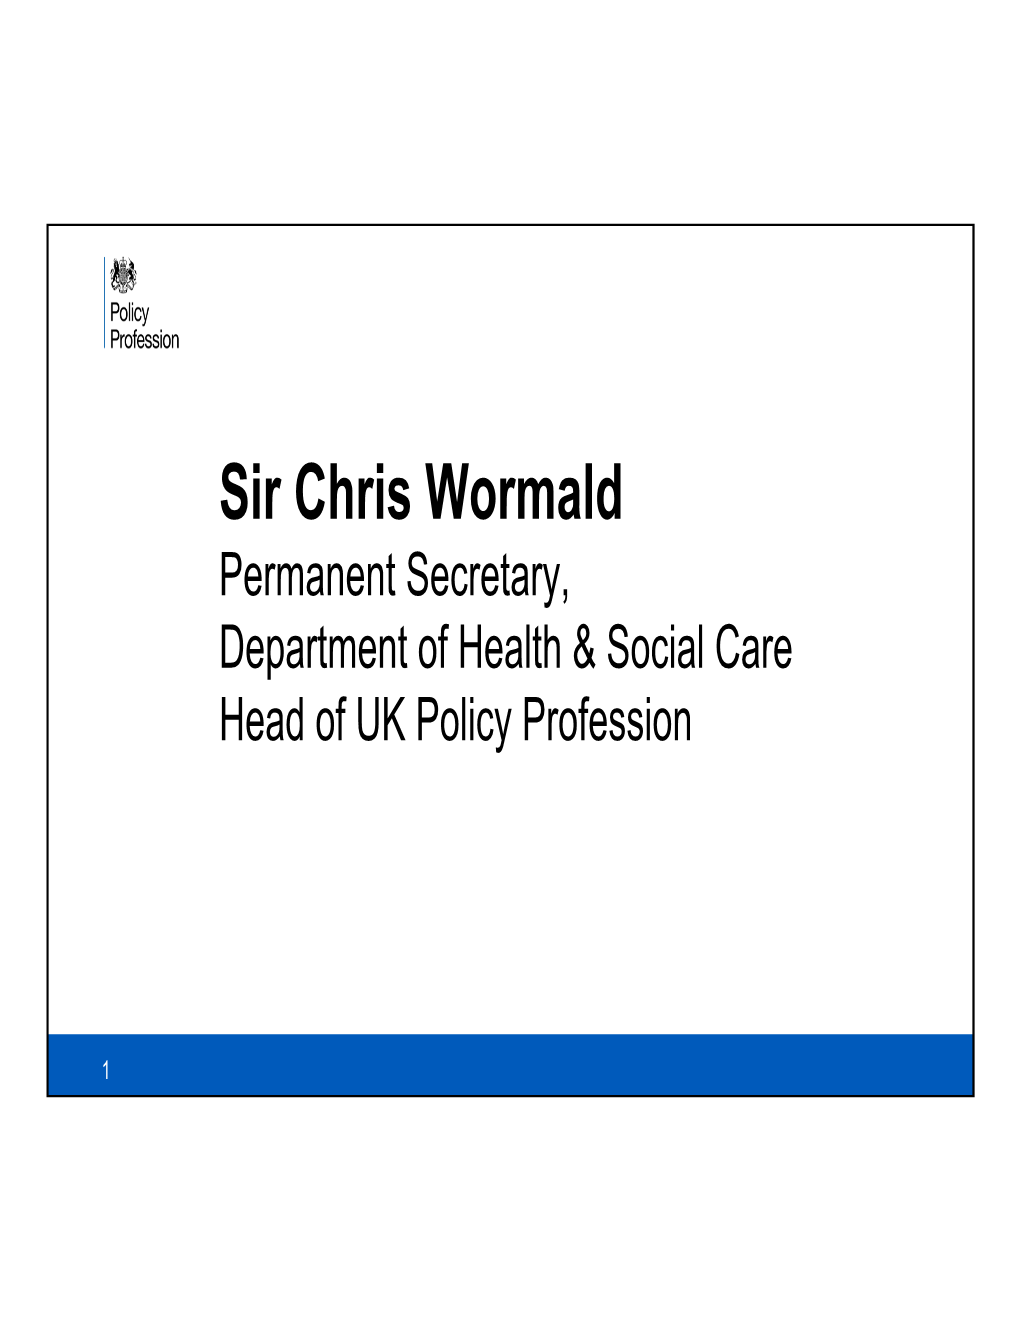 Sir Chris Wormald Permanent Secretary, Department of Health & Social Care Head of UK Policy Profession